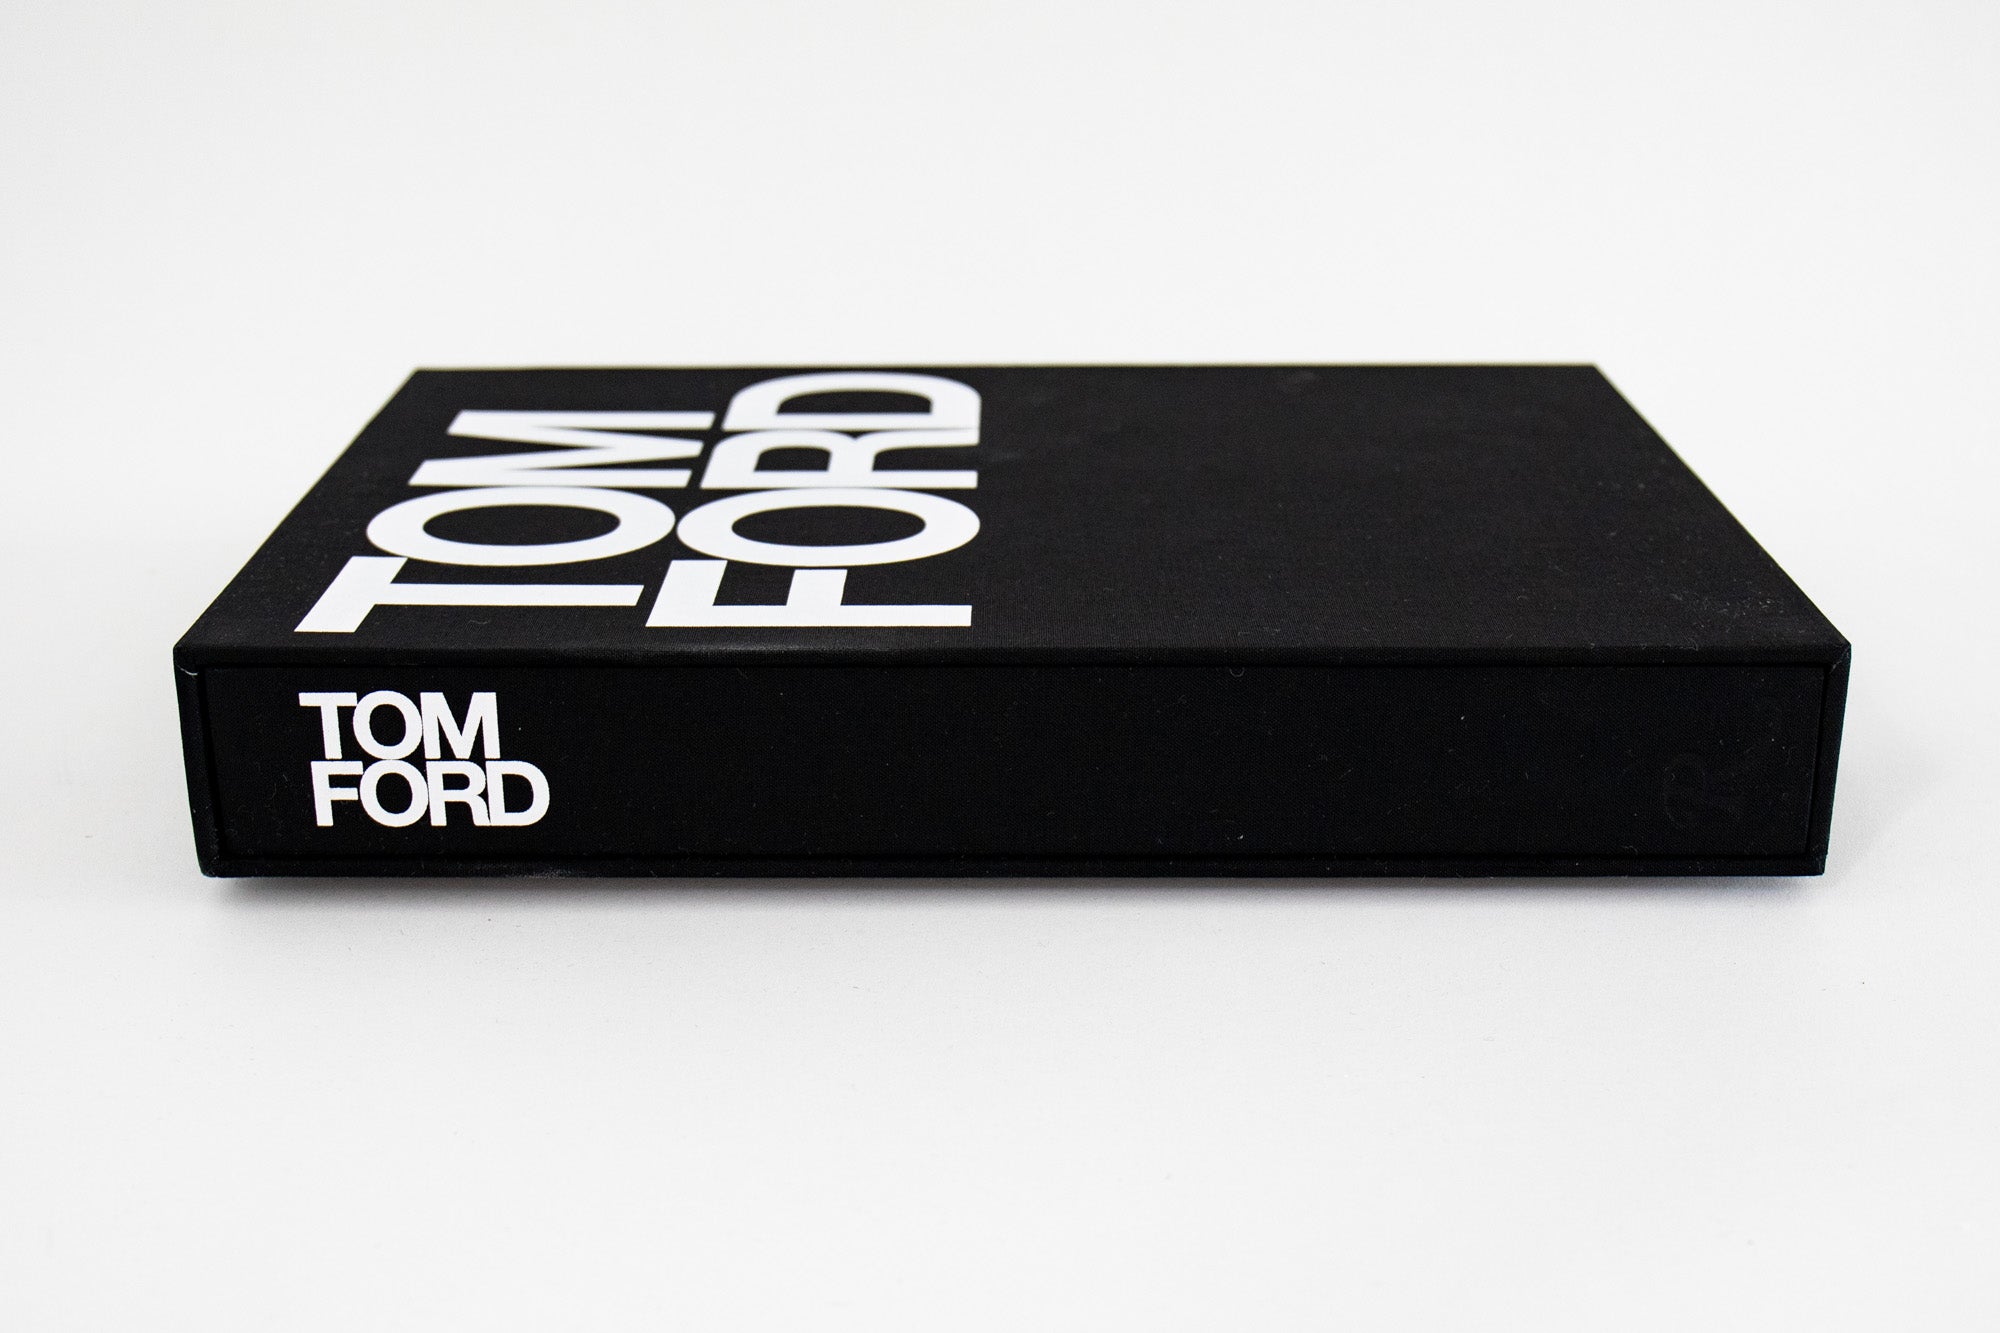 Tom Ford - Brands Book